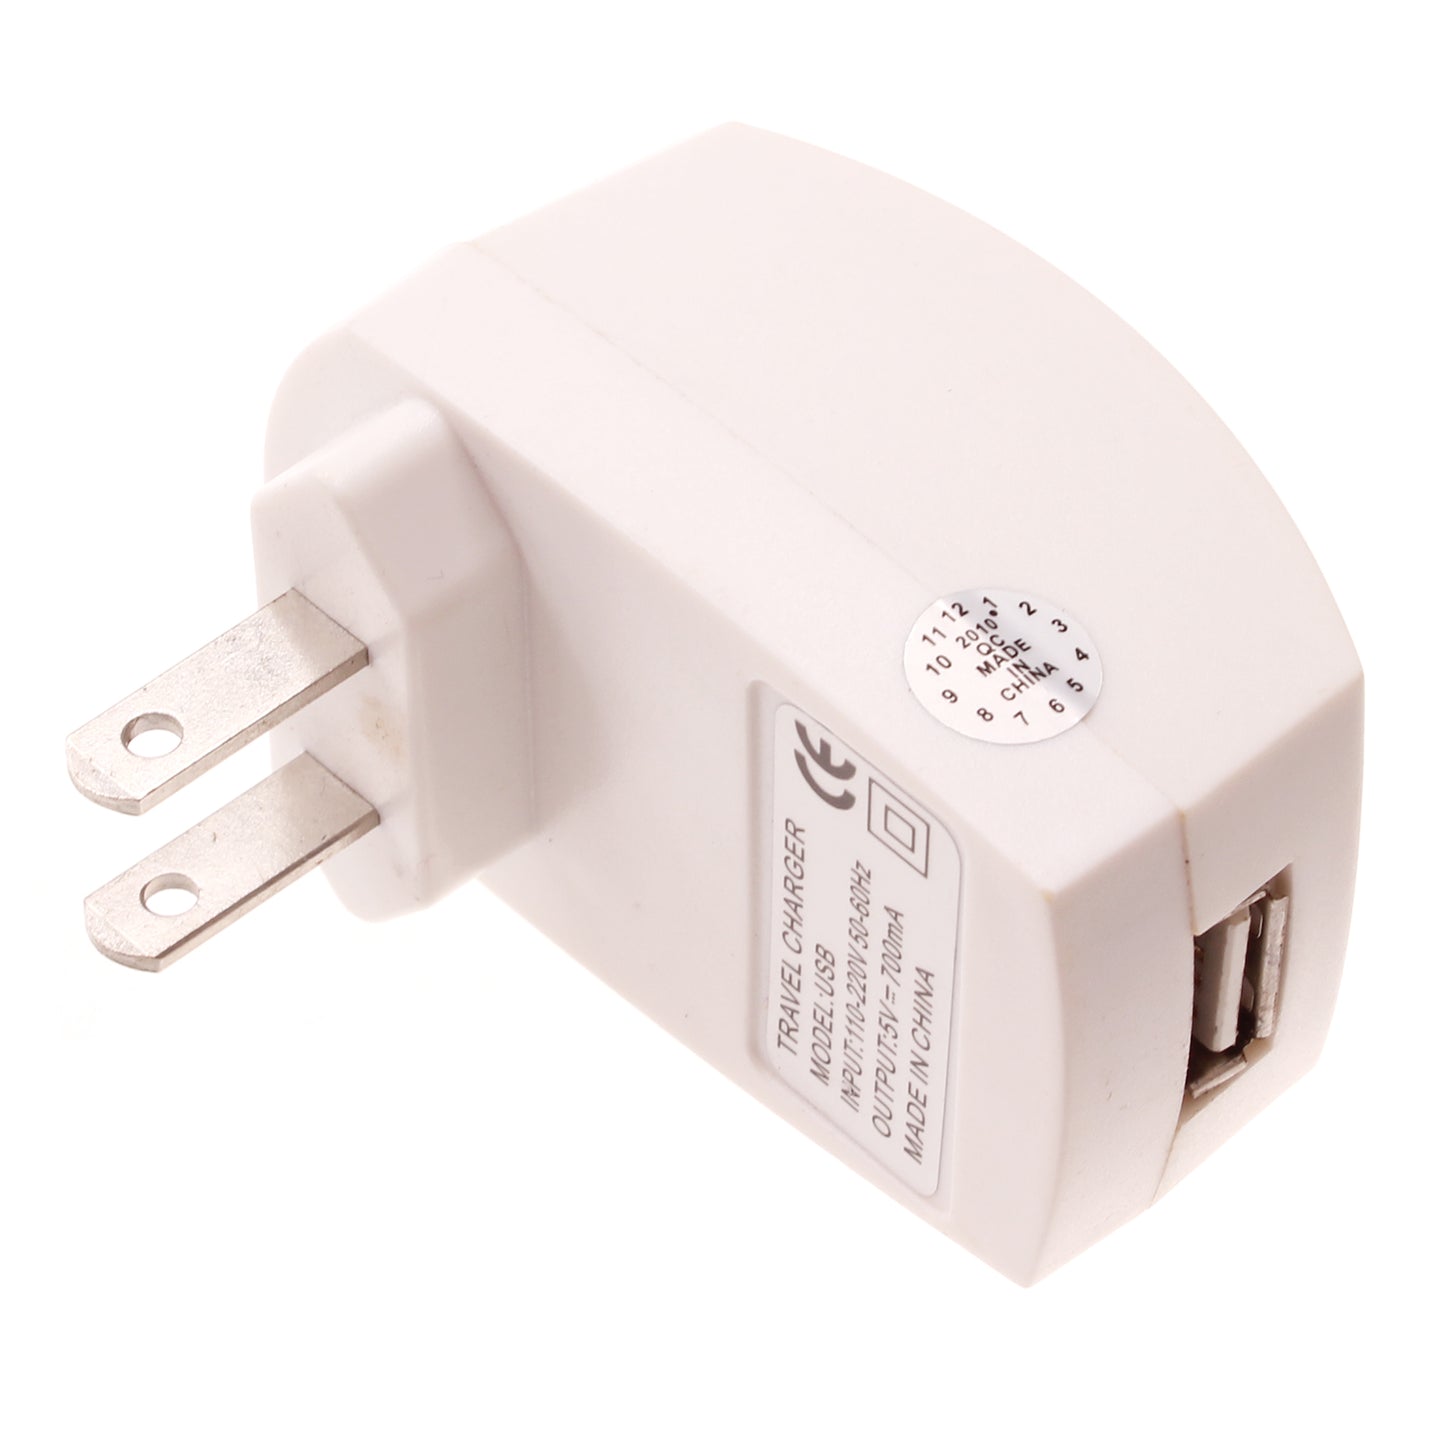 Home Charger, AC Plug Charging Cord Type-C Wall Power Adapter 6ft Long USB-C Cable - NWY18